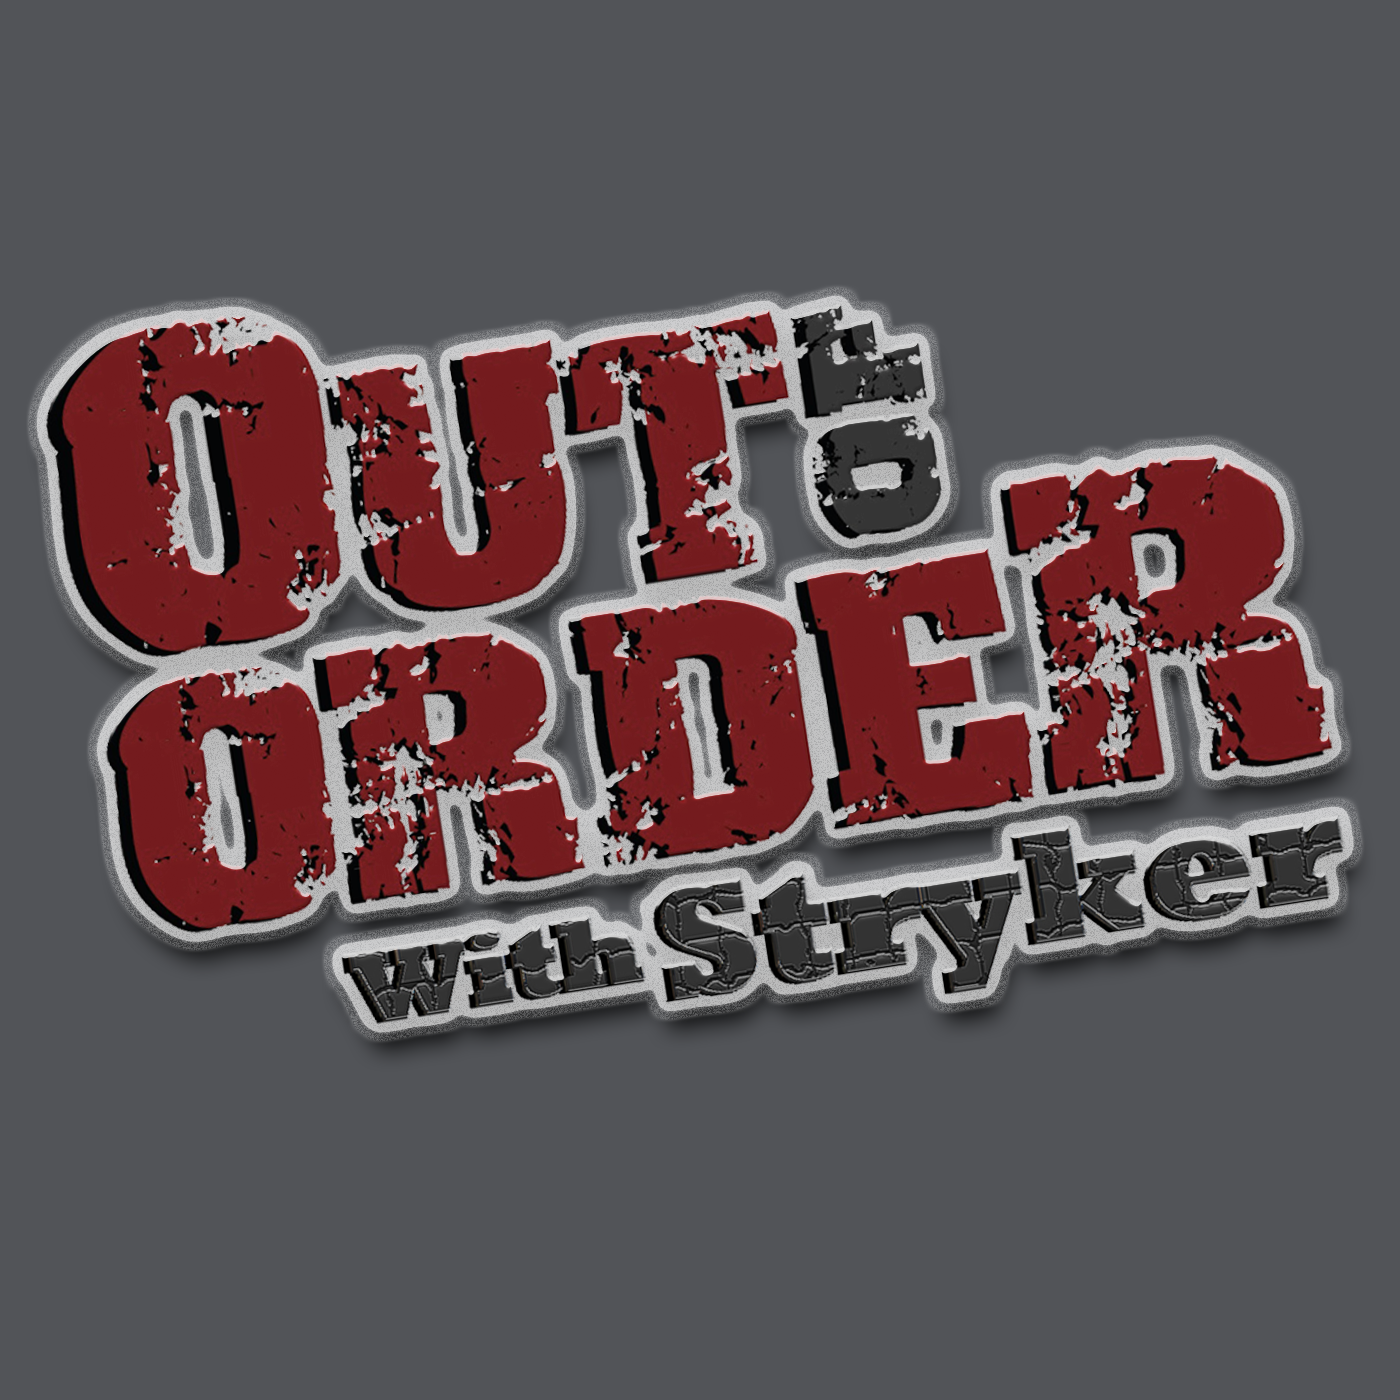 Out of Order with Stryker